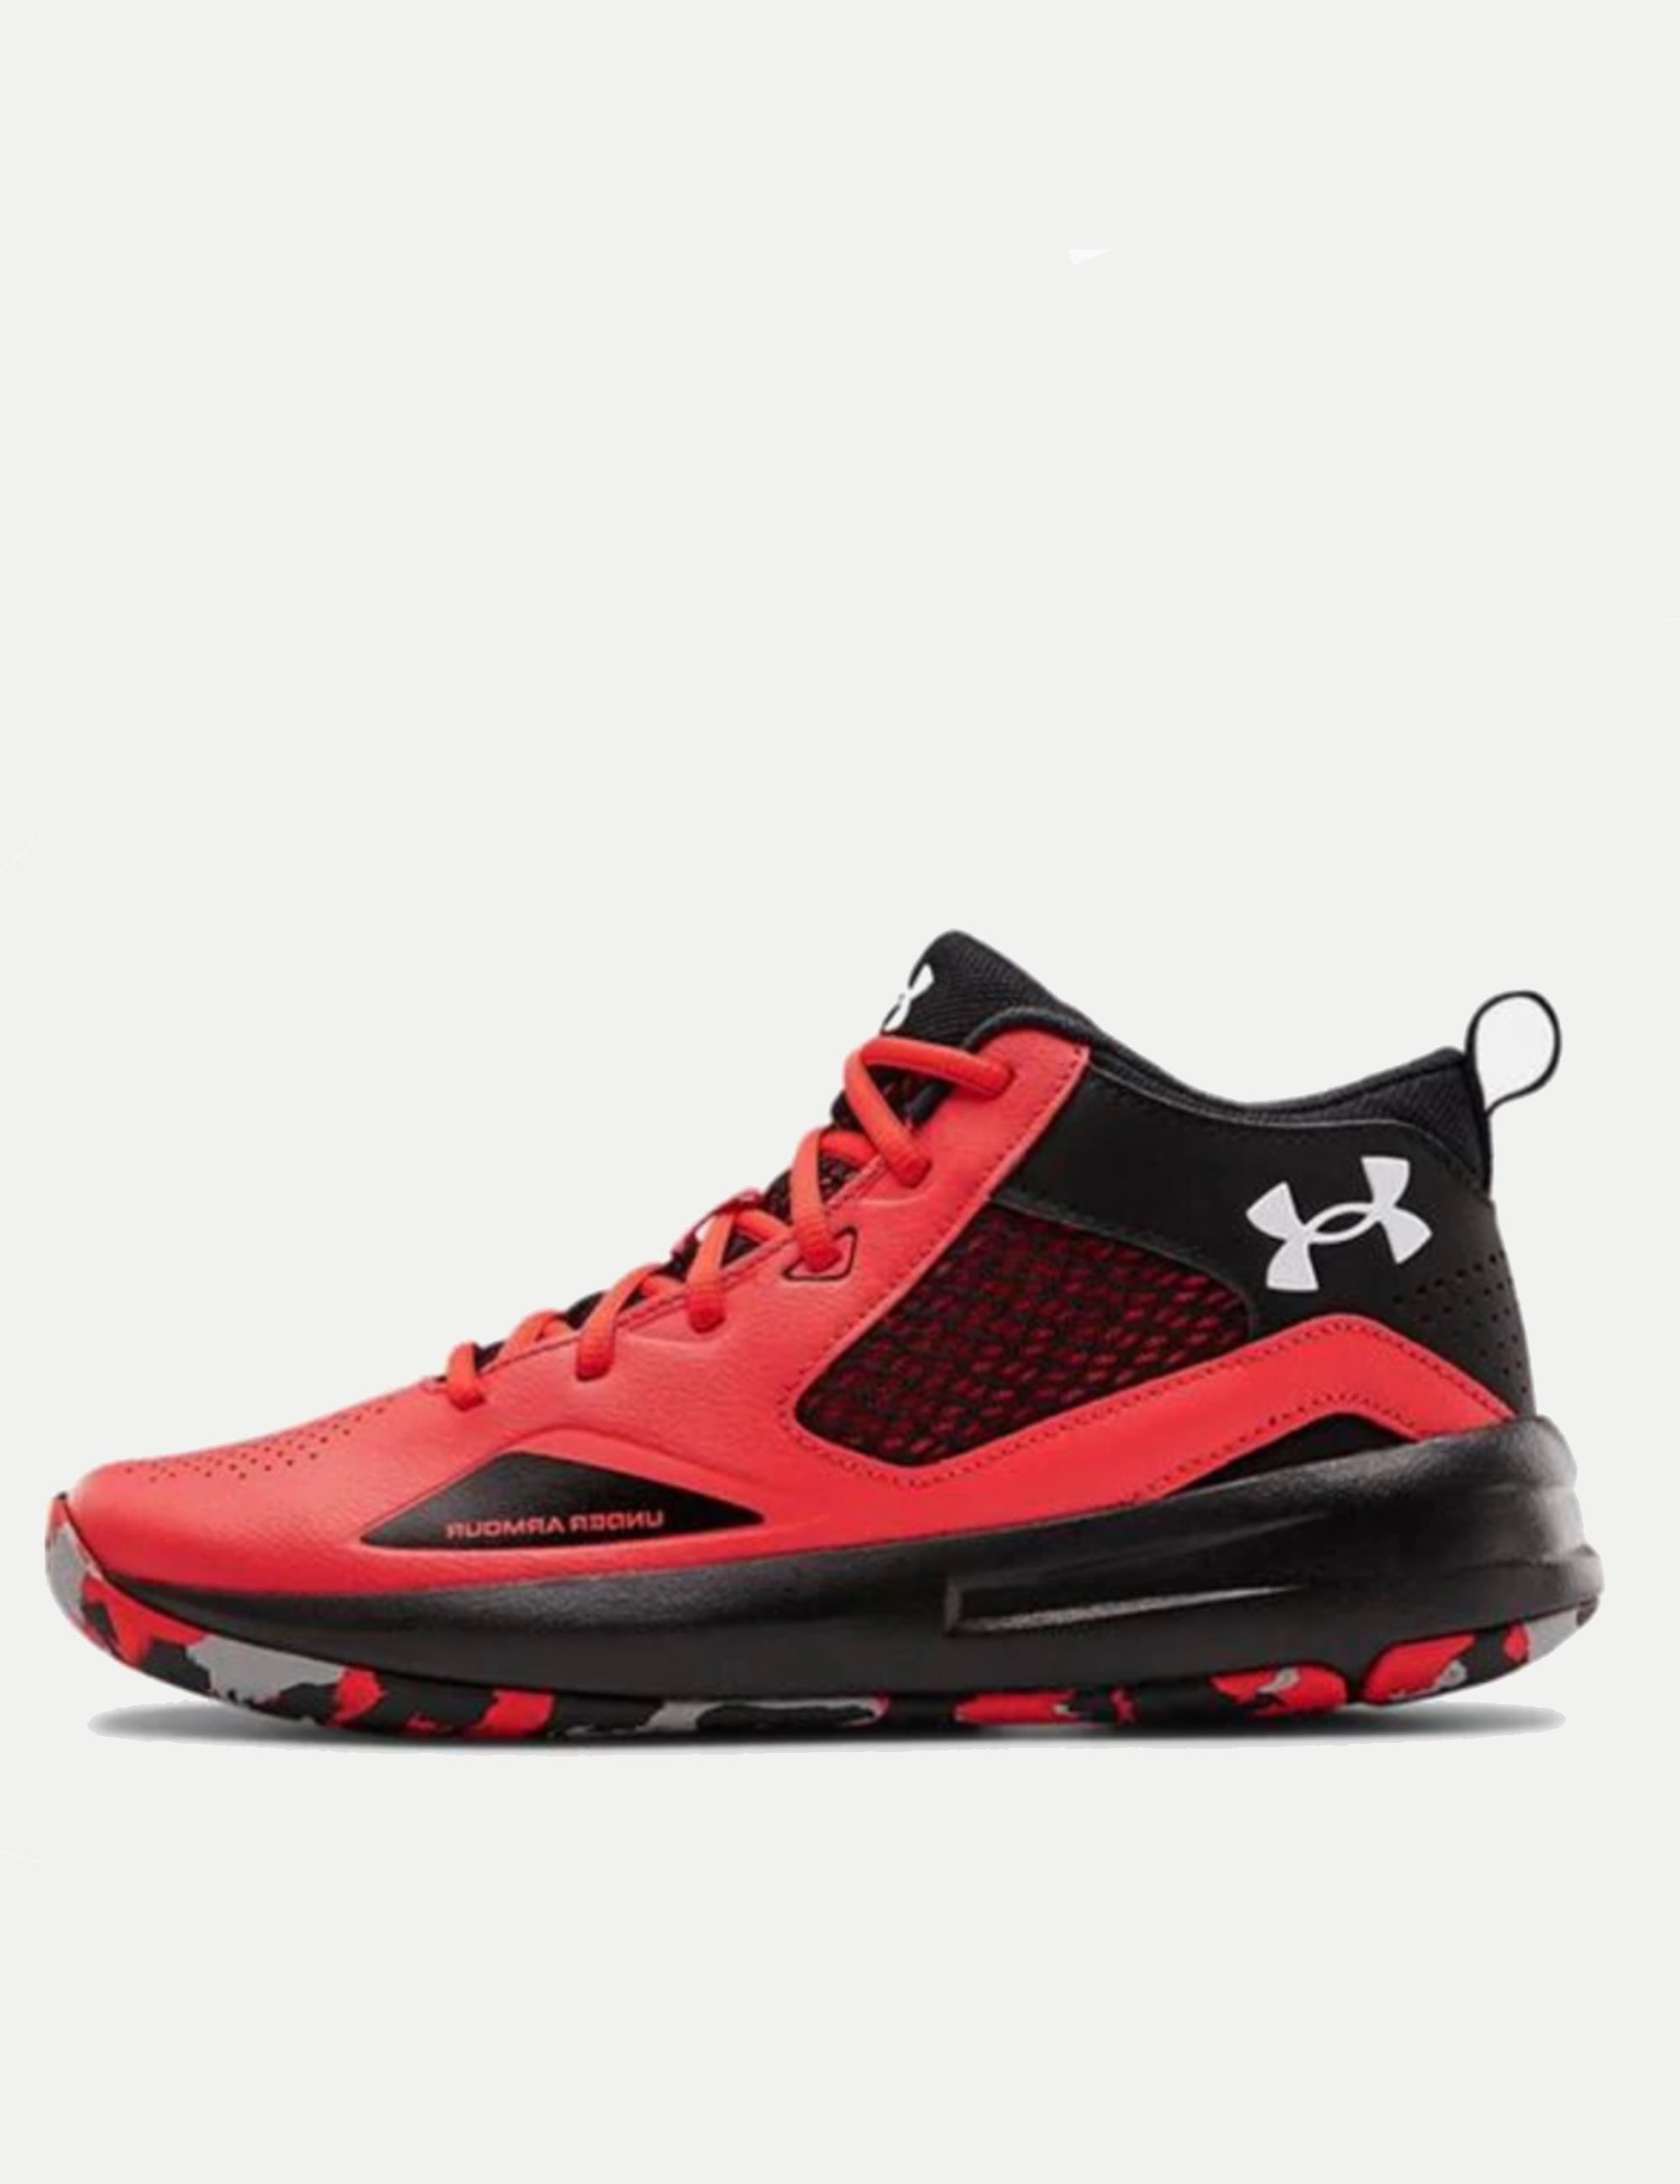 Under Armour Men's Adult Lockdown 5 Basketball Shoes